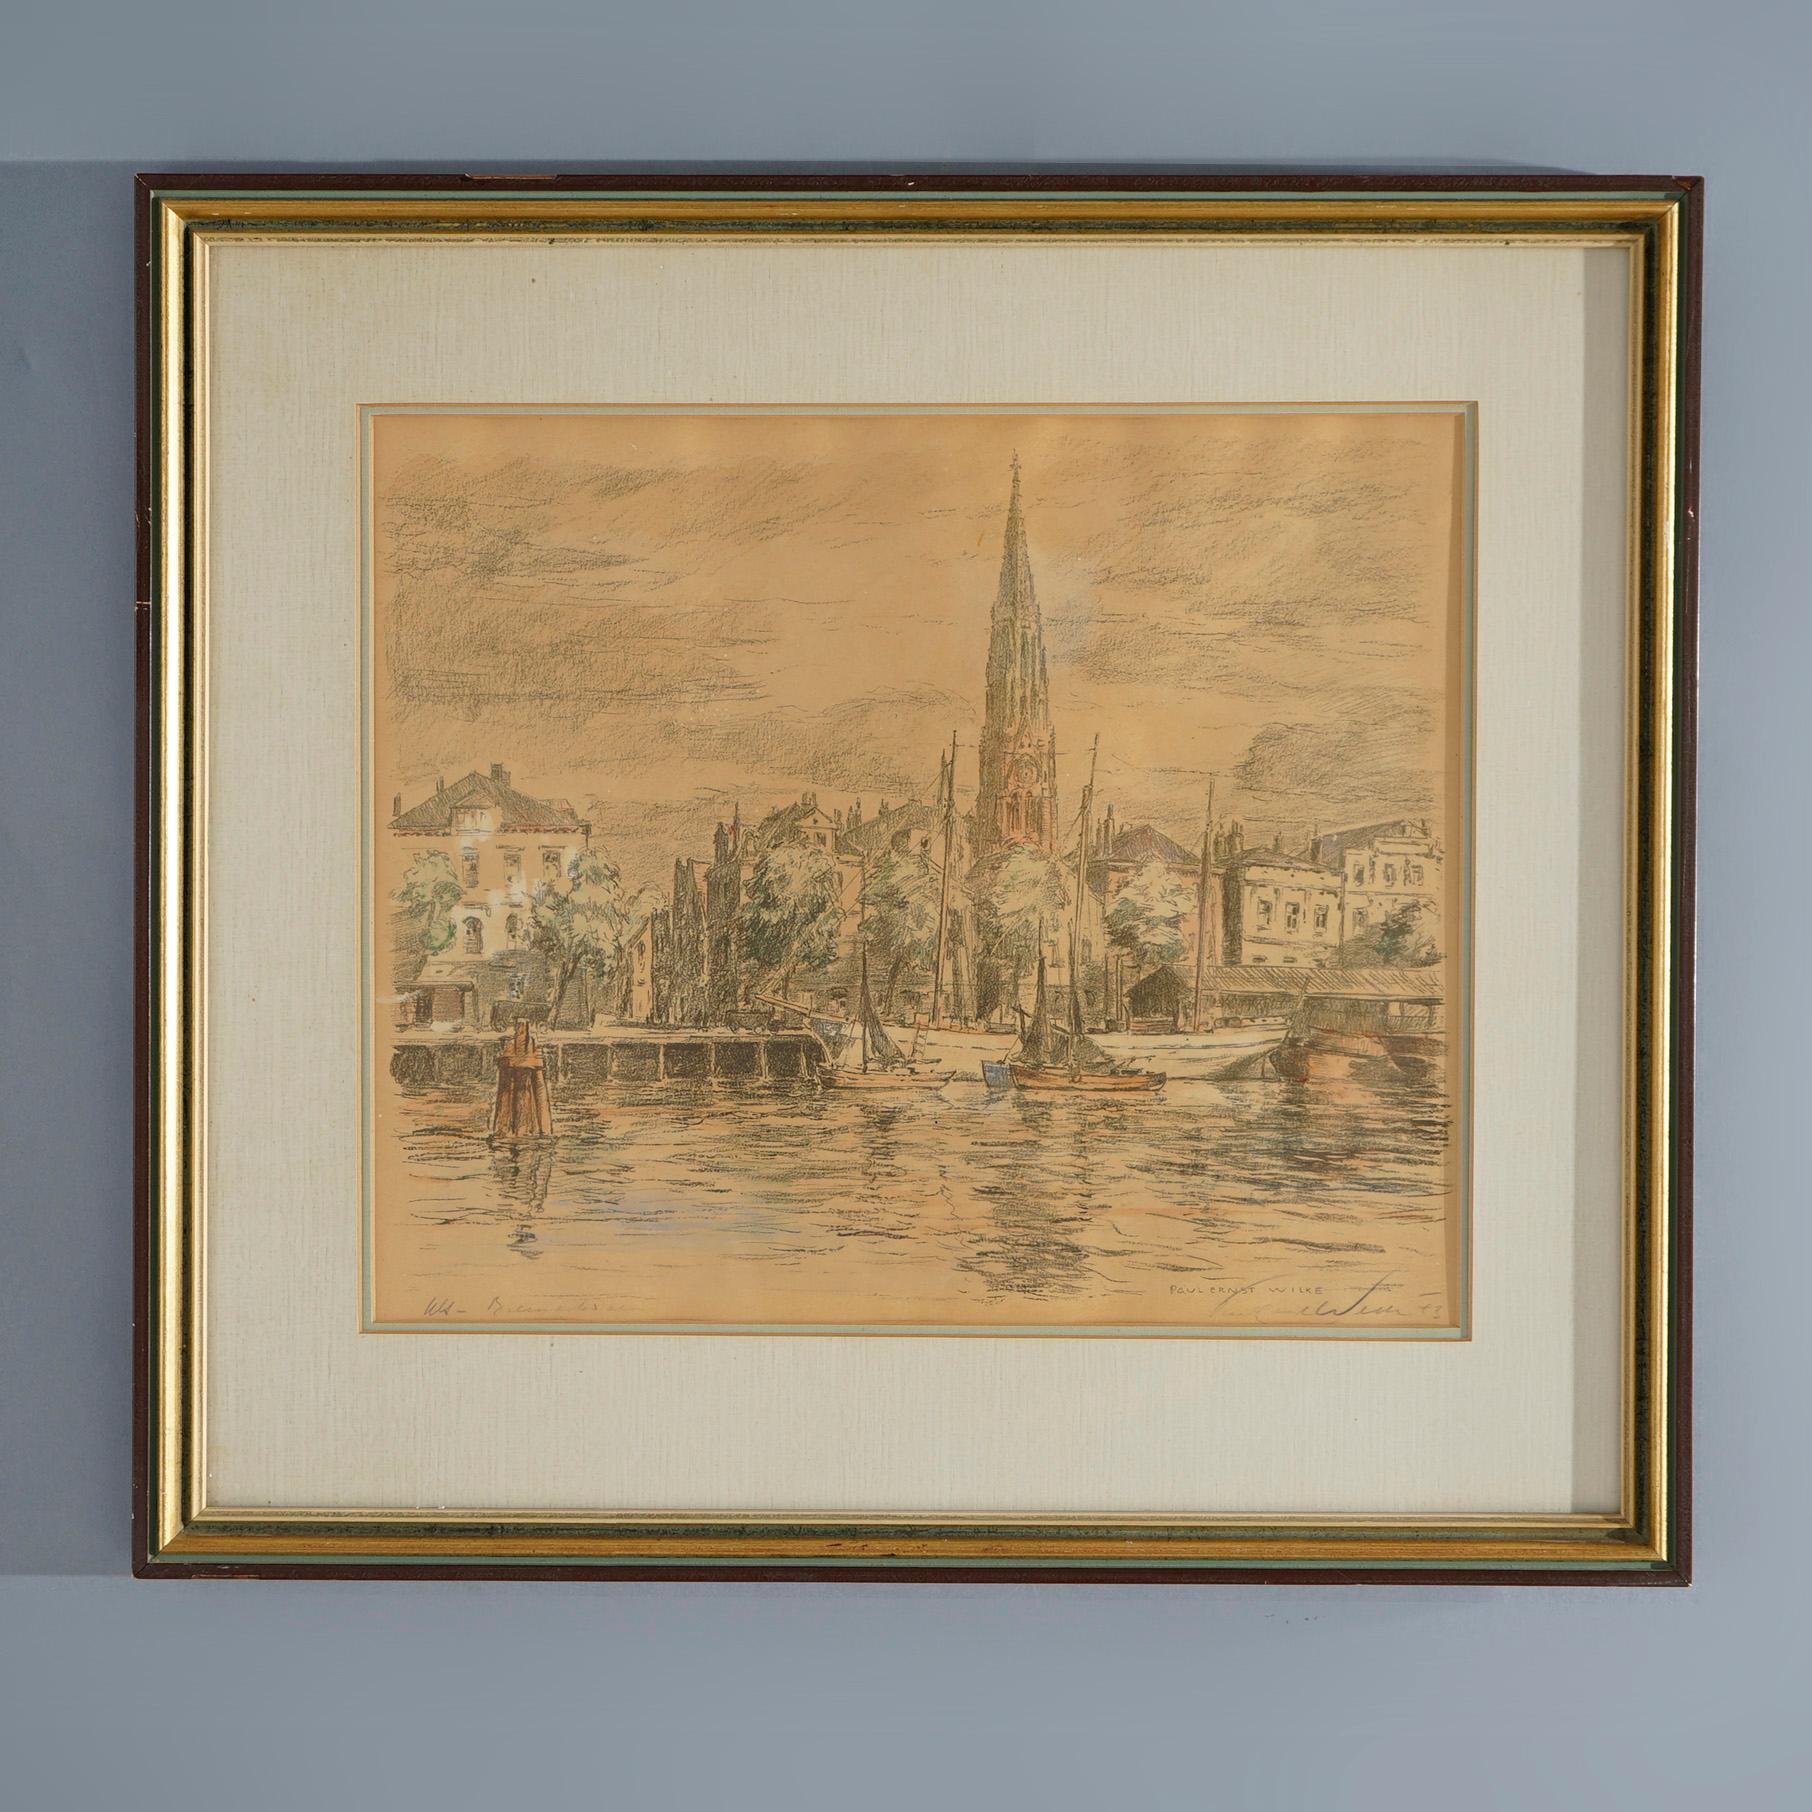 An antique painting by Paul Earnst Wilke offers watercolor cityscape harbor scene with structures, bridge, boats and figures, artist signed lower right, framed, c1940

Measures- 20.5''H x 22.5''W x 1''D; 21'' X 19'' sight.

Catalogue Note: Ask about